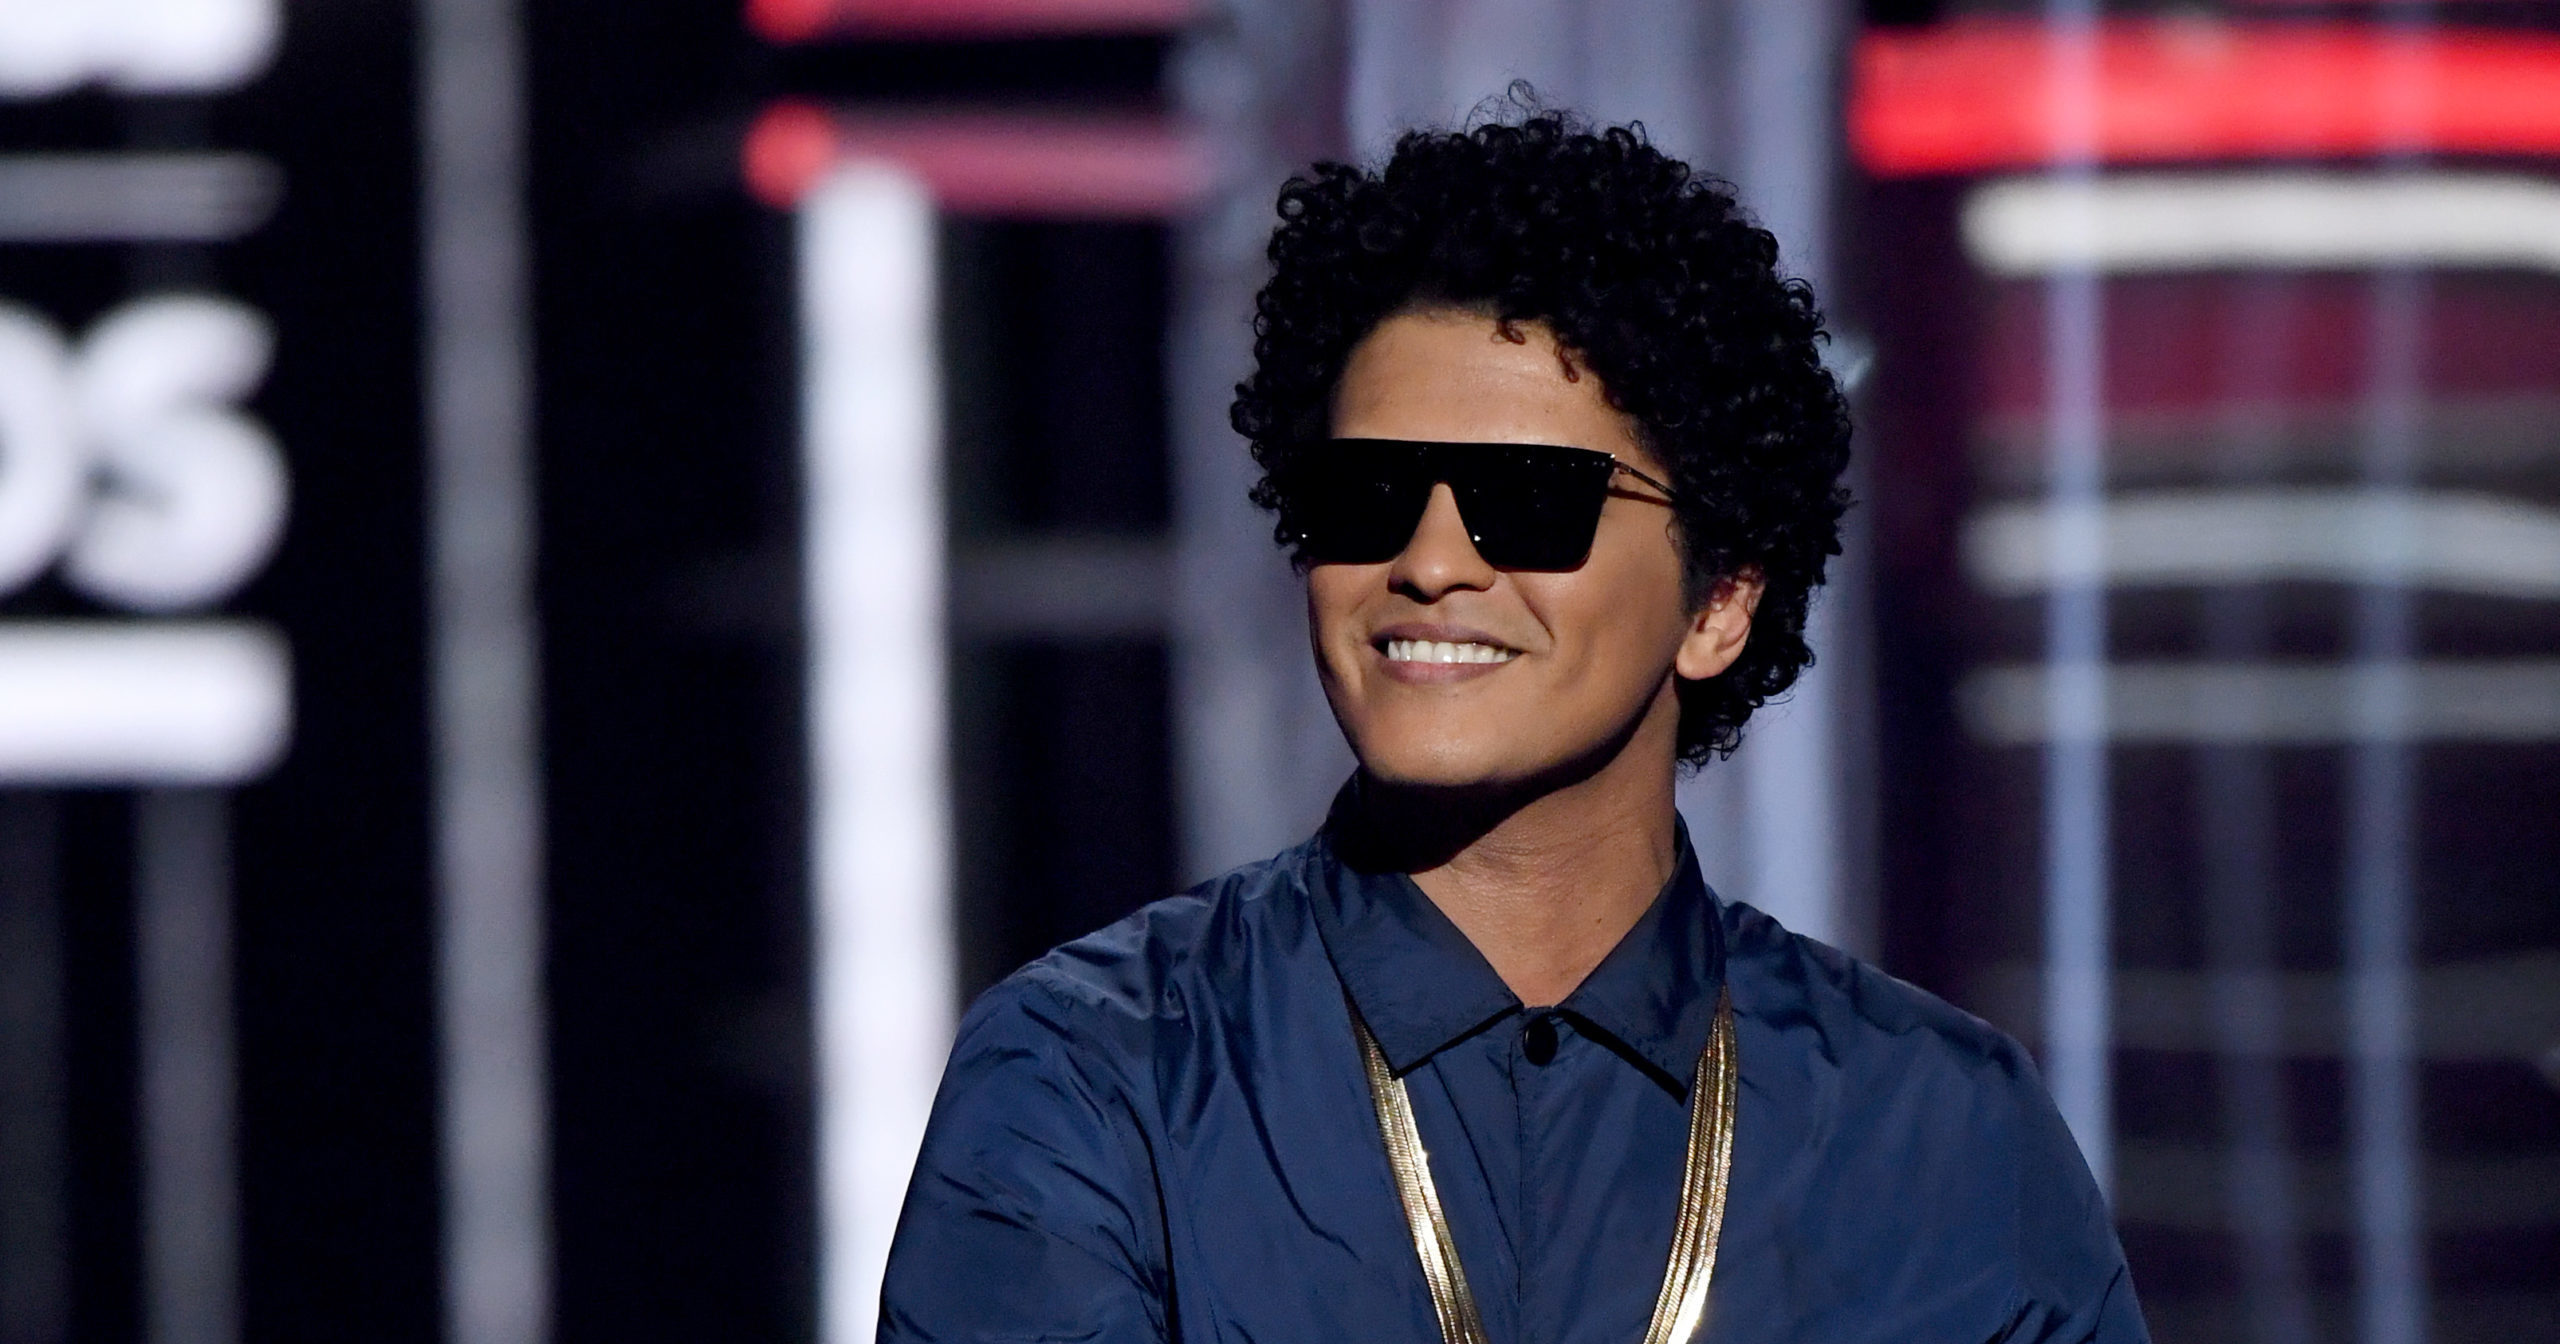 Tired Of Waiting Bruno Mars Has Revealed That He’s FastForwarding His